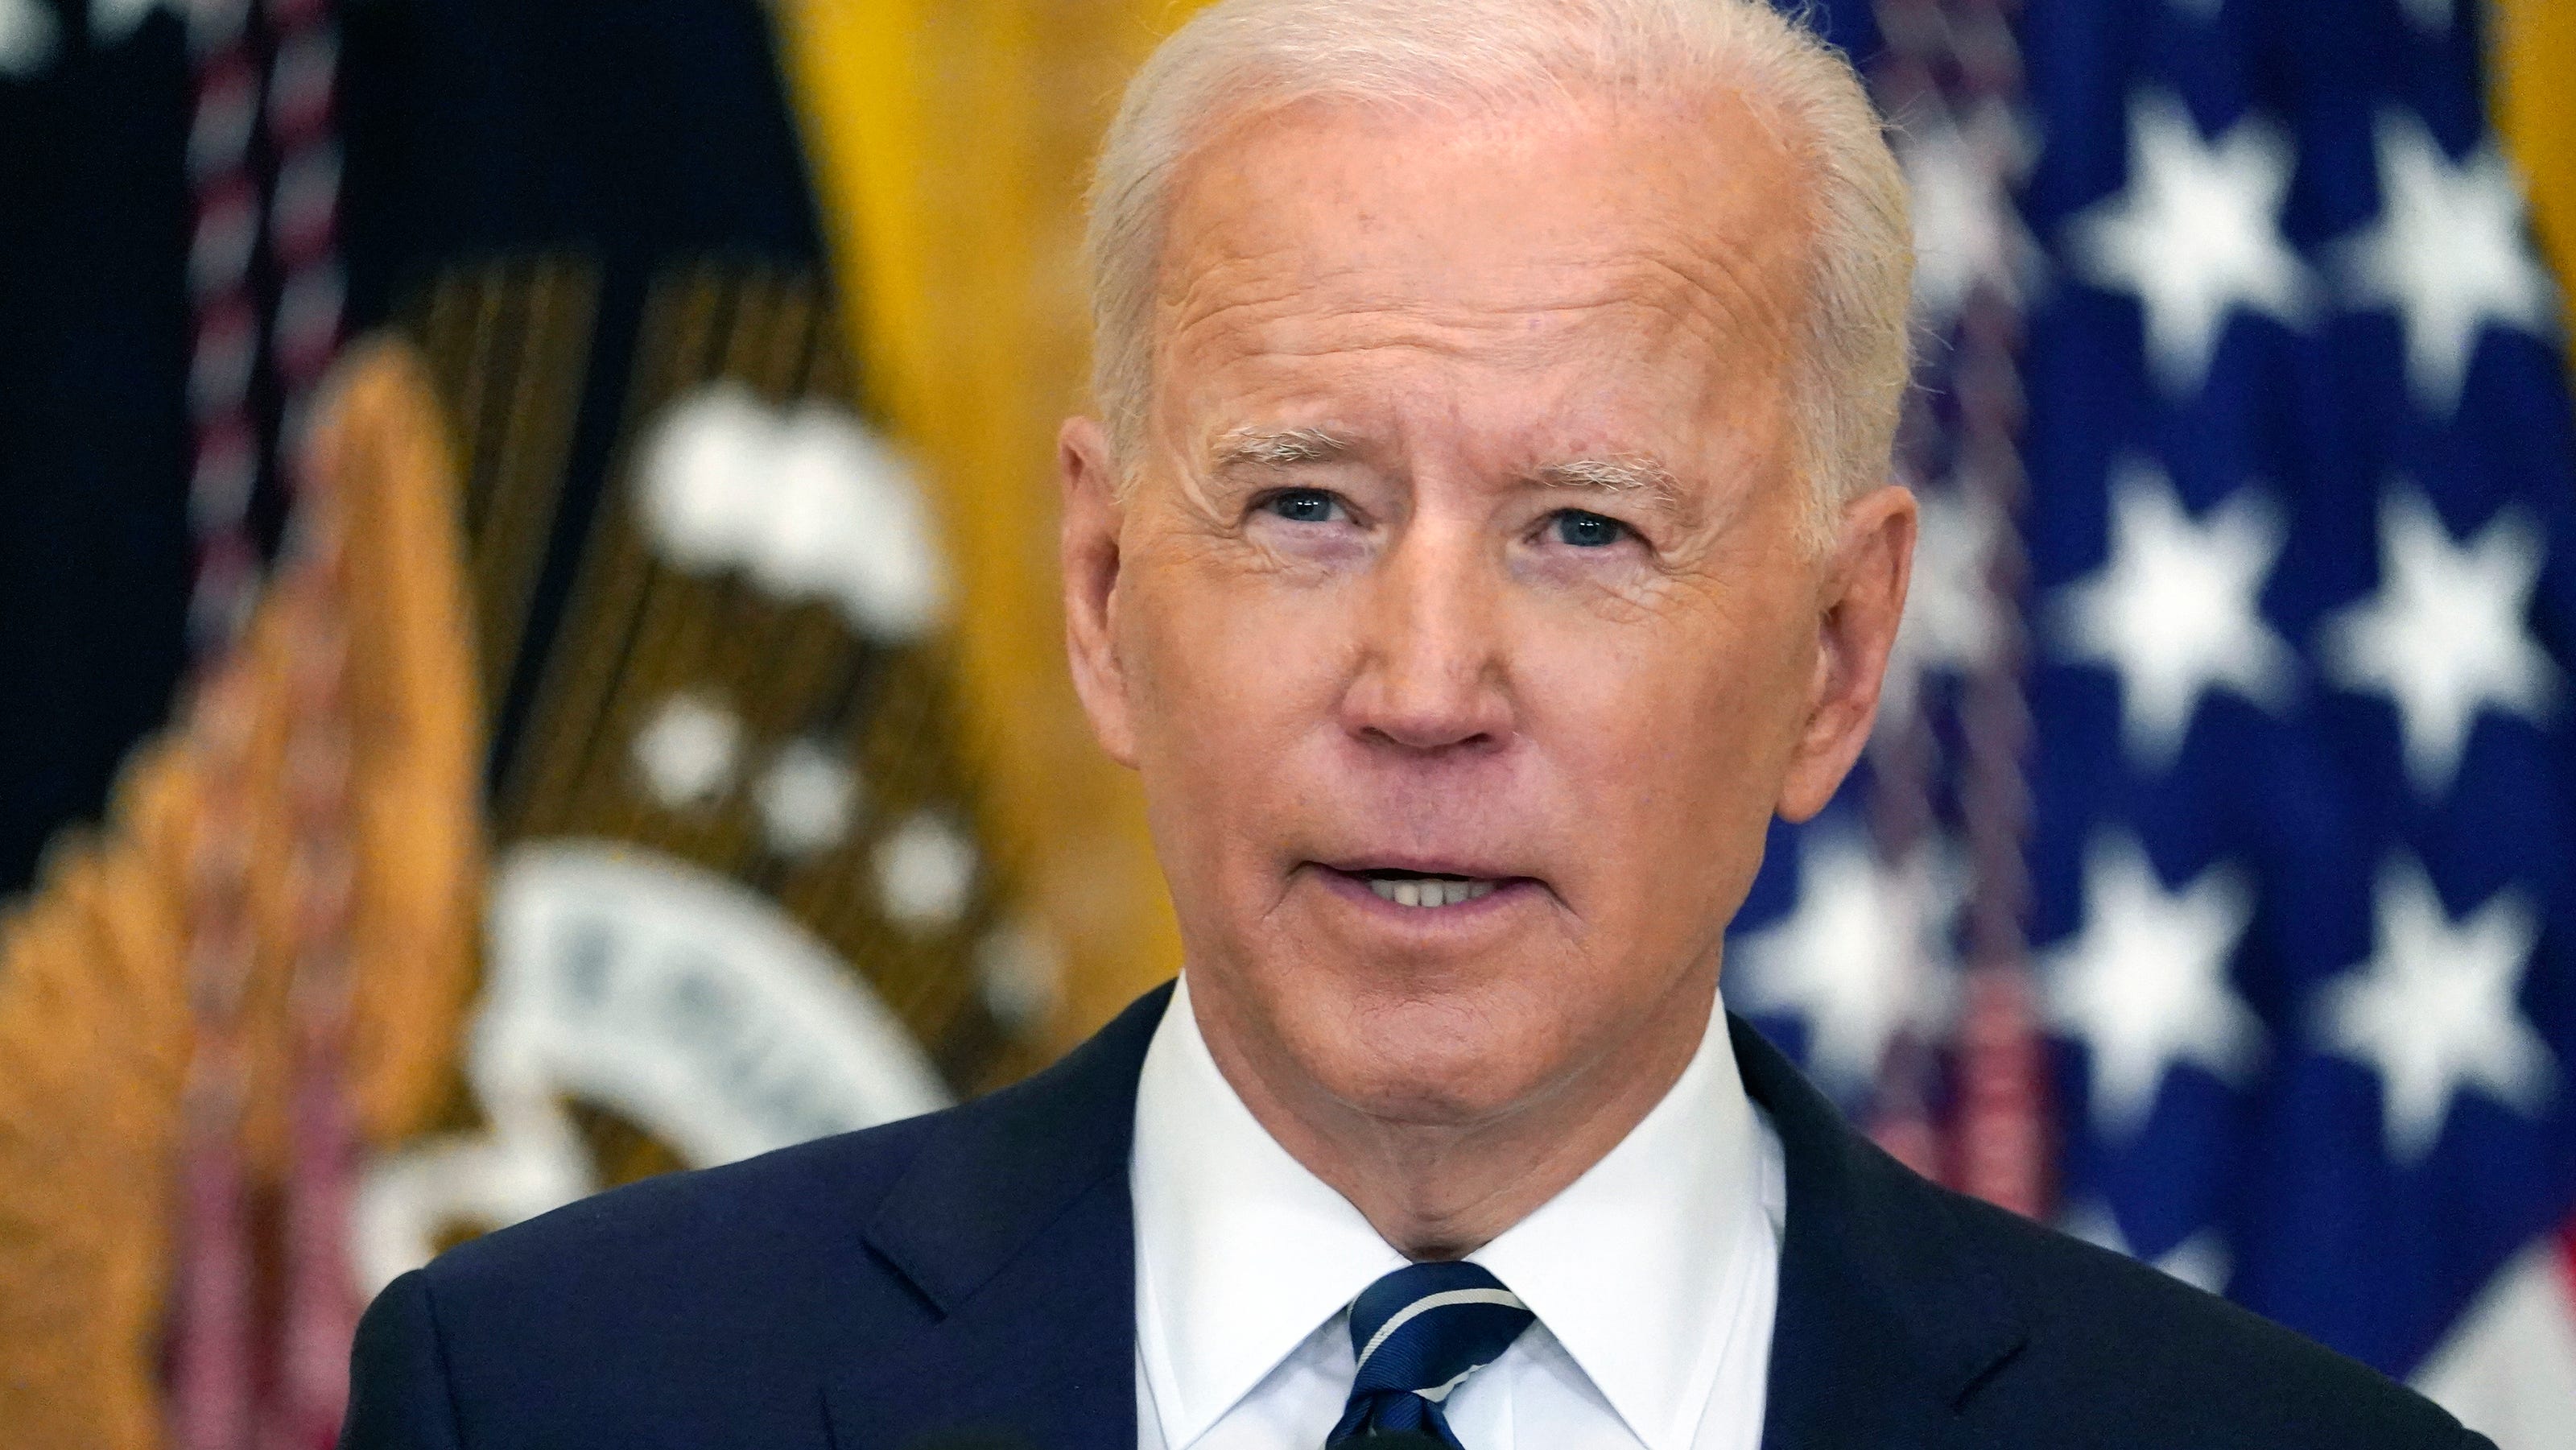 Biden should have dodged reelection question at first news conference